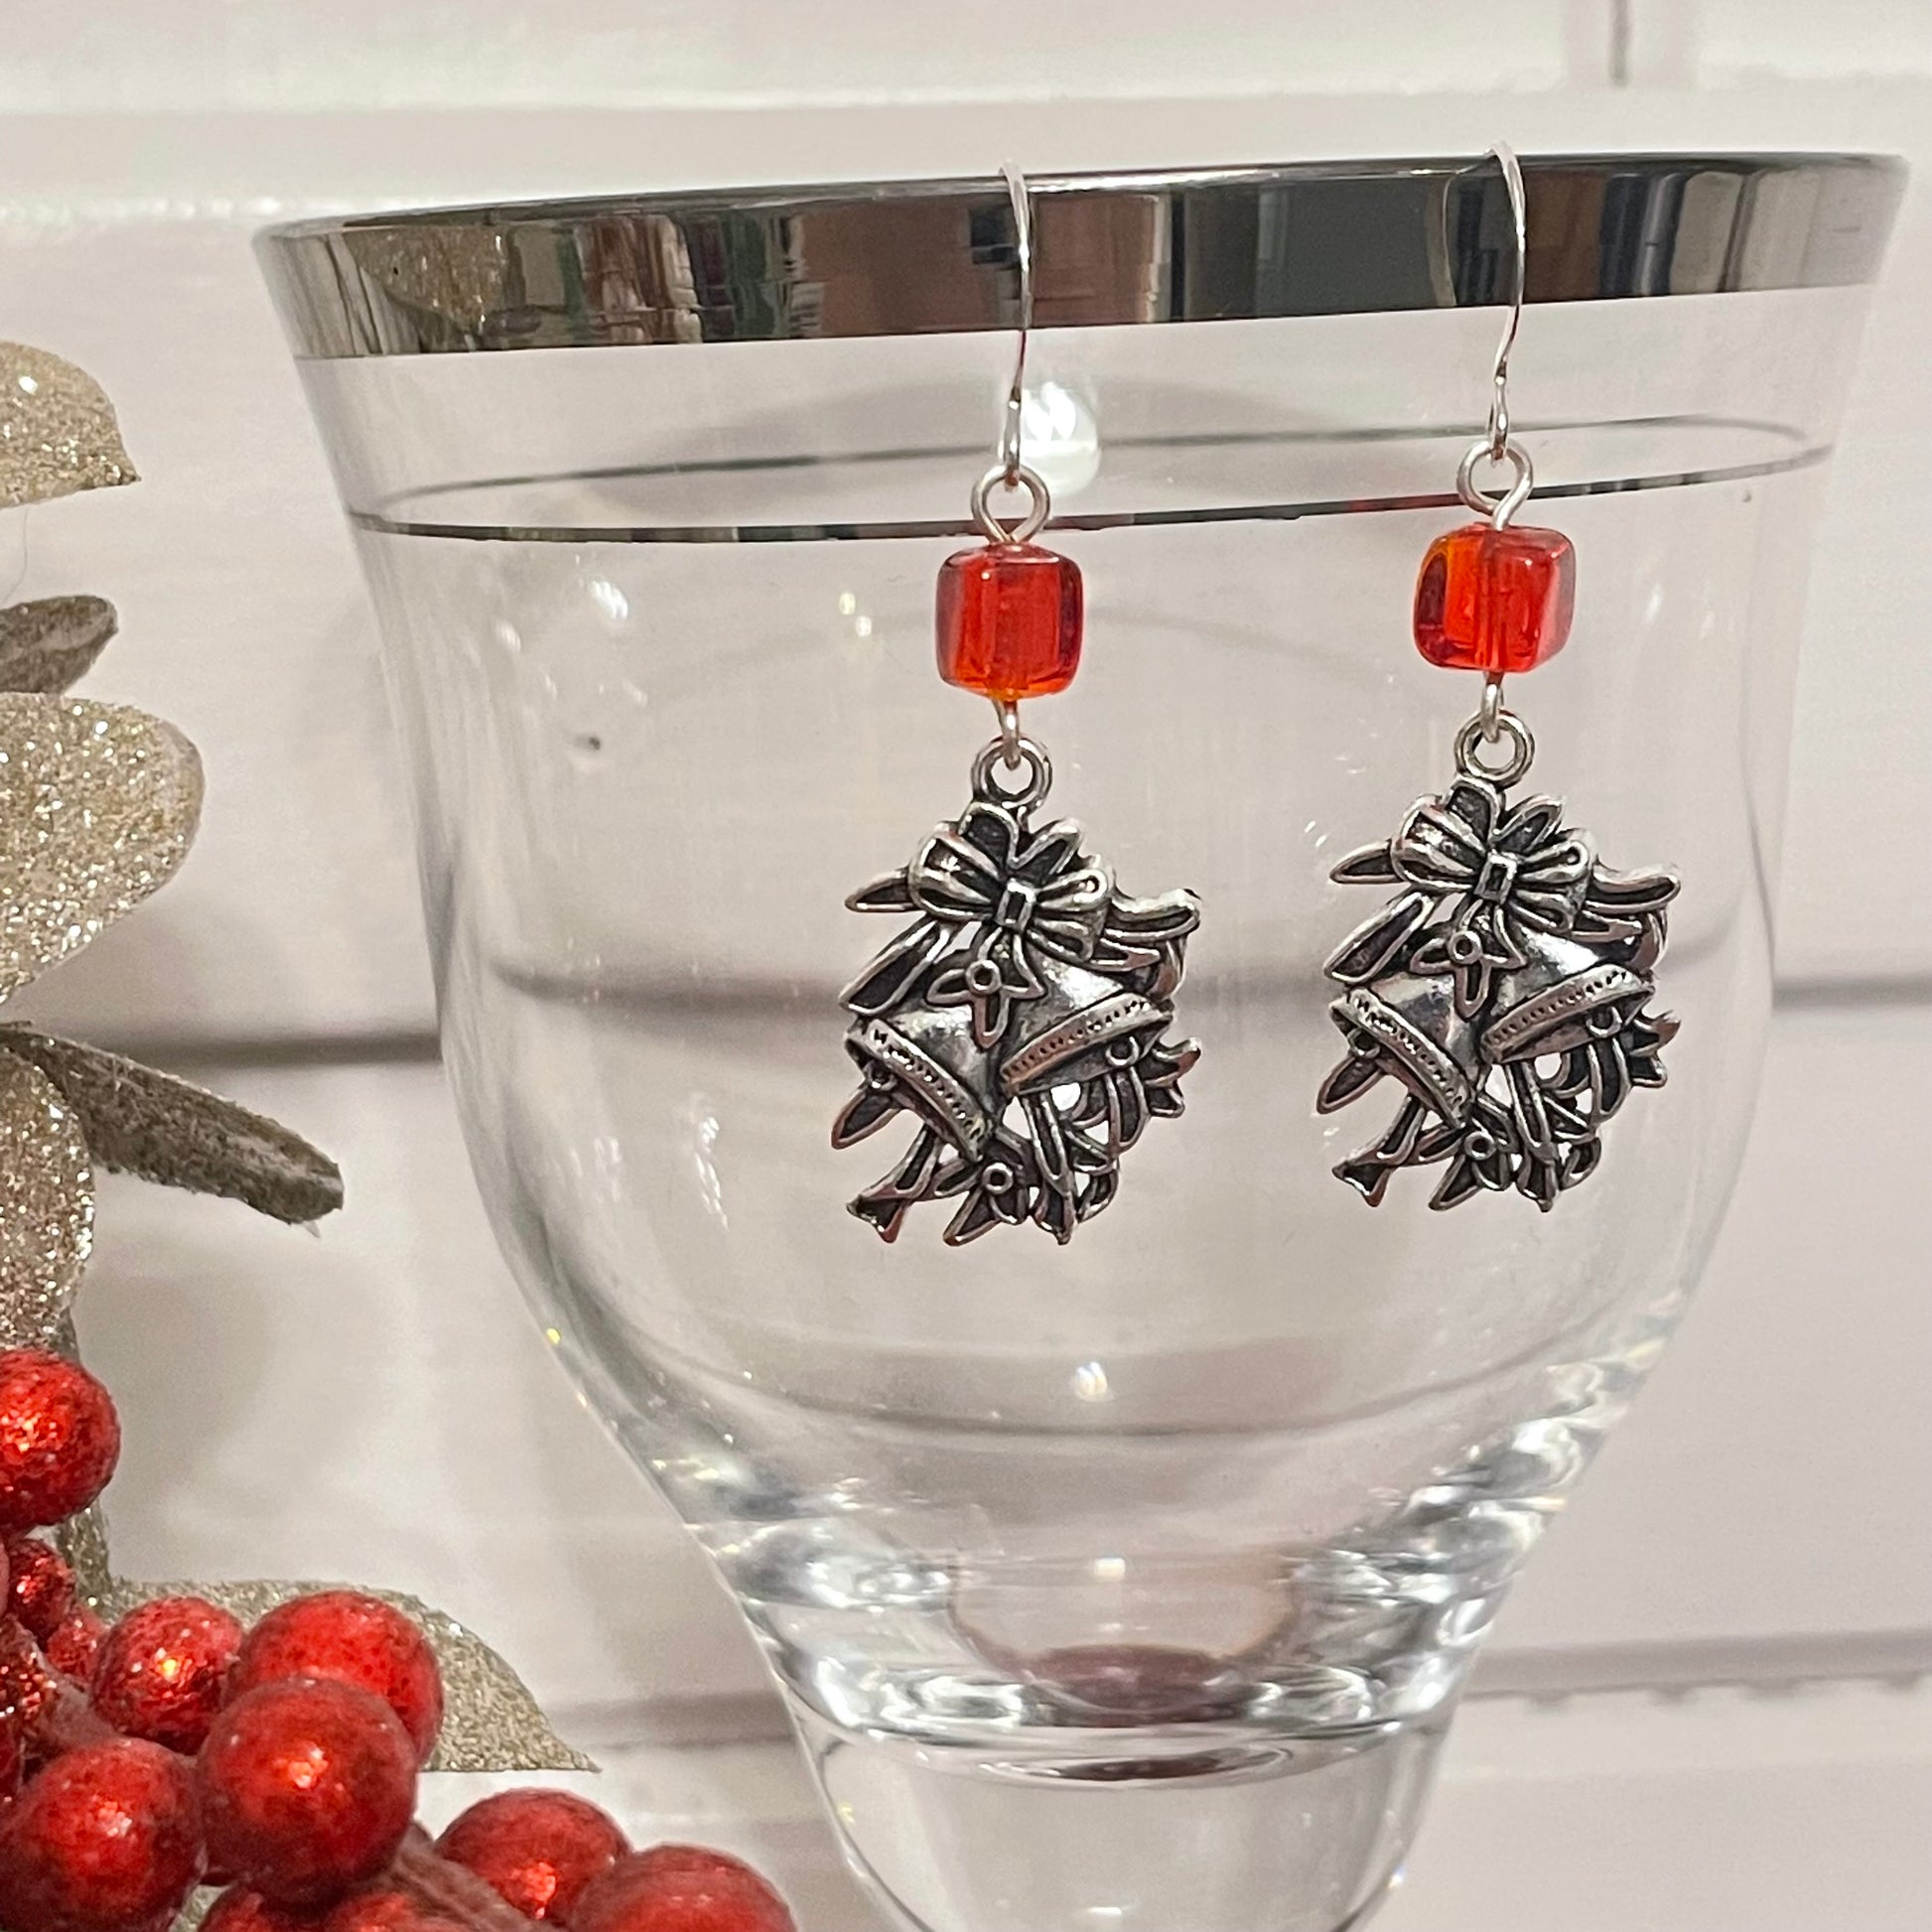 Handmade Bell Charm Earrings Square Bead Accent Holiday Christmas Stocking December Secret Santa Mixed Metal Red Glass